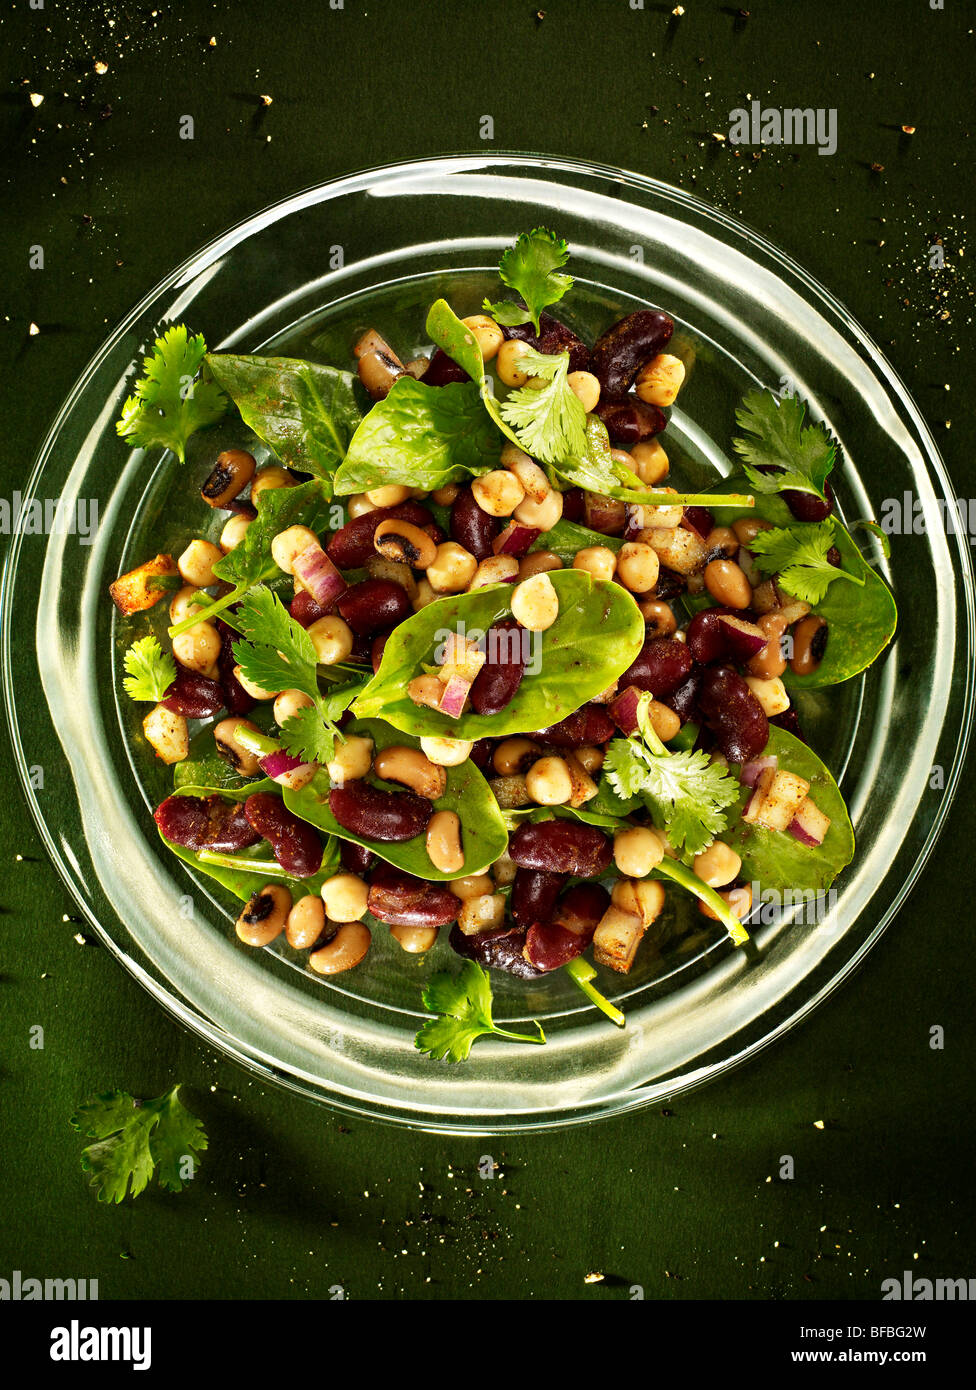 Bean salad, chickpeas, kidney beans, and black eyed beans with spinach, red onion and coriander. Stock Photo